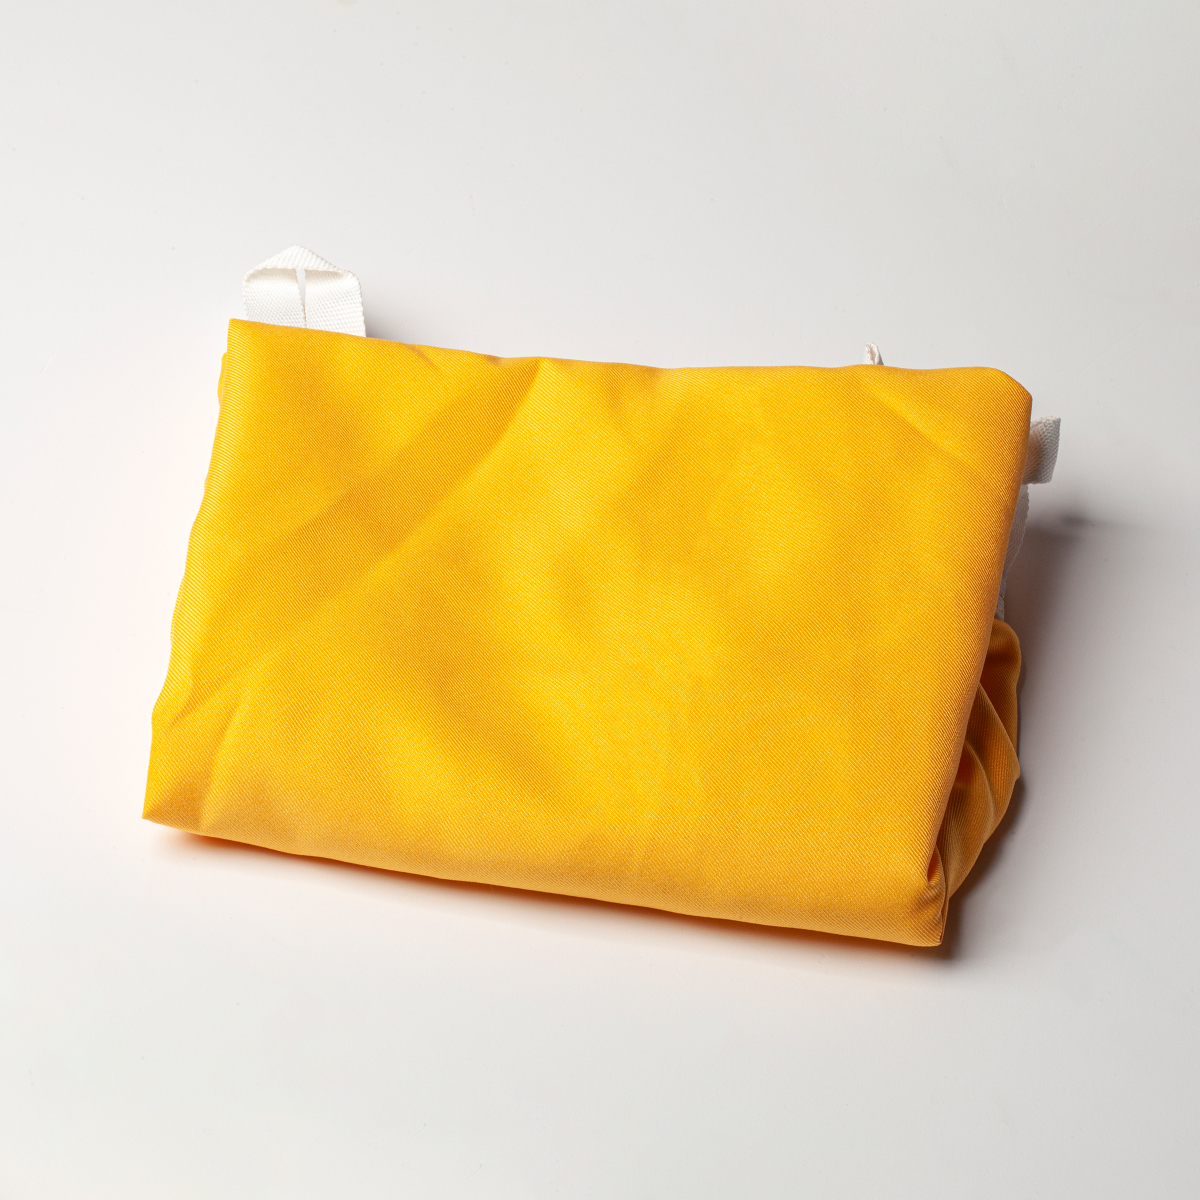 Laundry Bag Large - Yellow - Vendella - Specialists in Hospitality Products